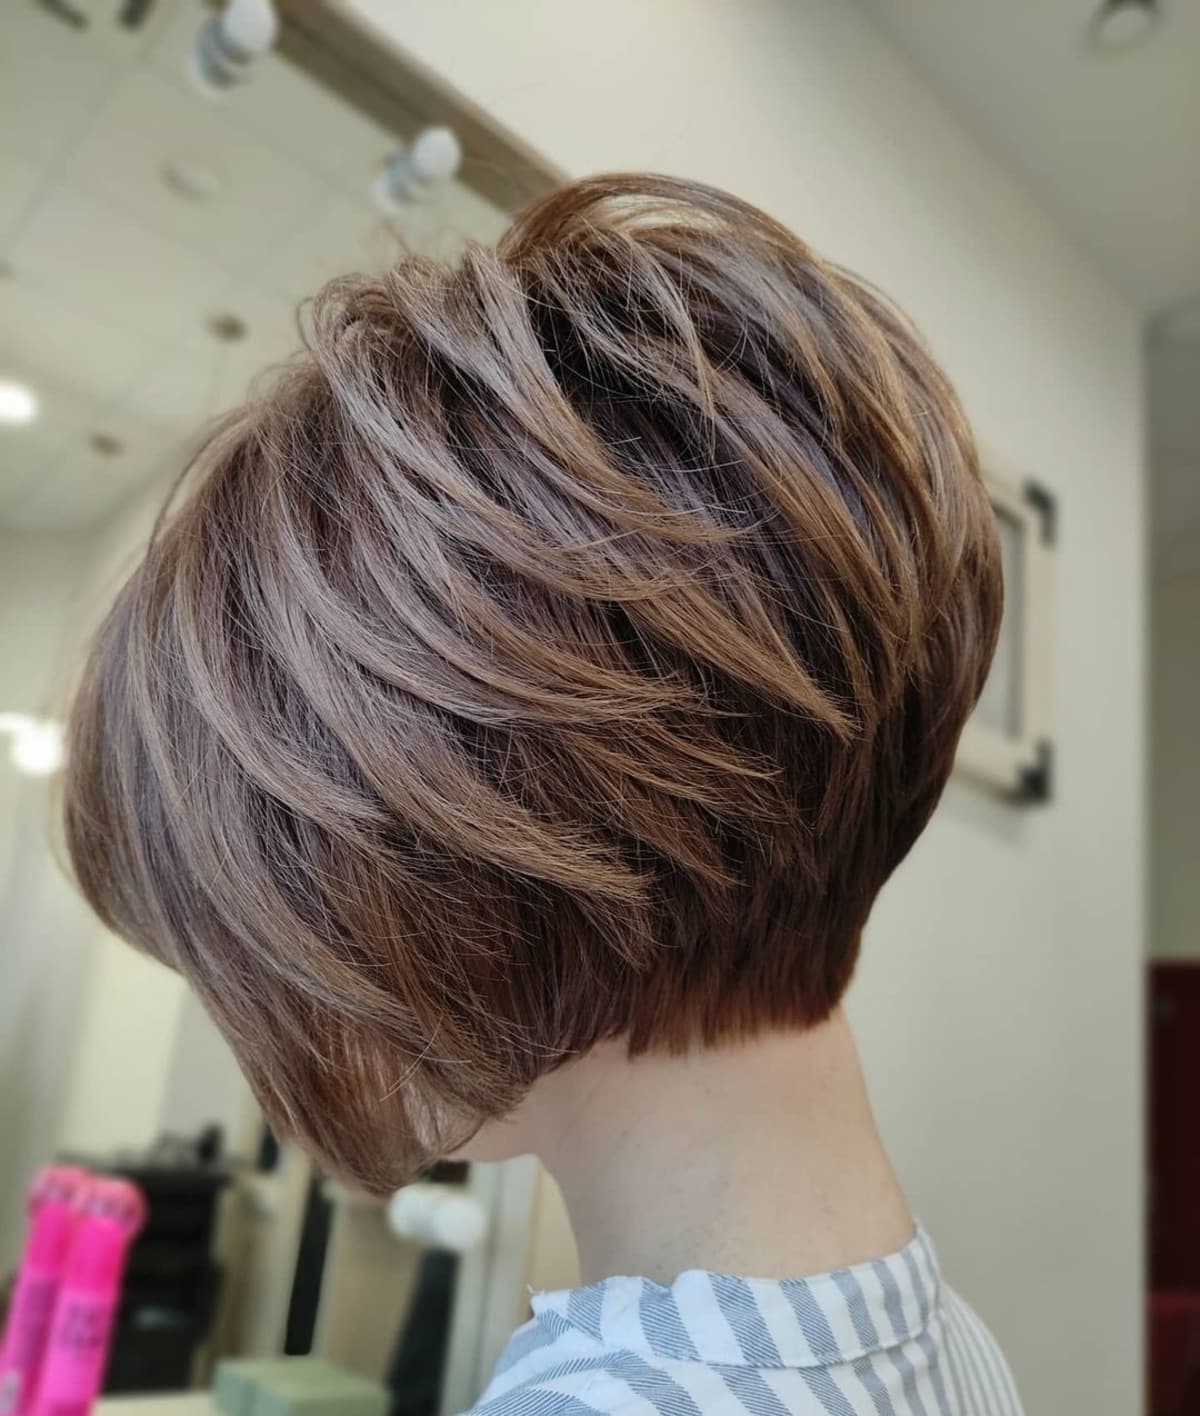 Feathered stacked bob with piece-y layers